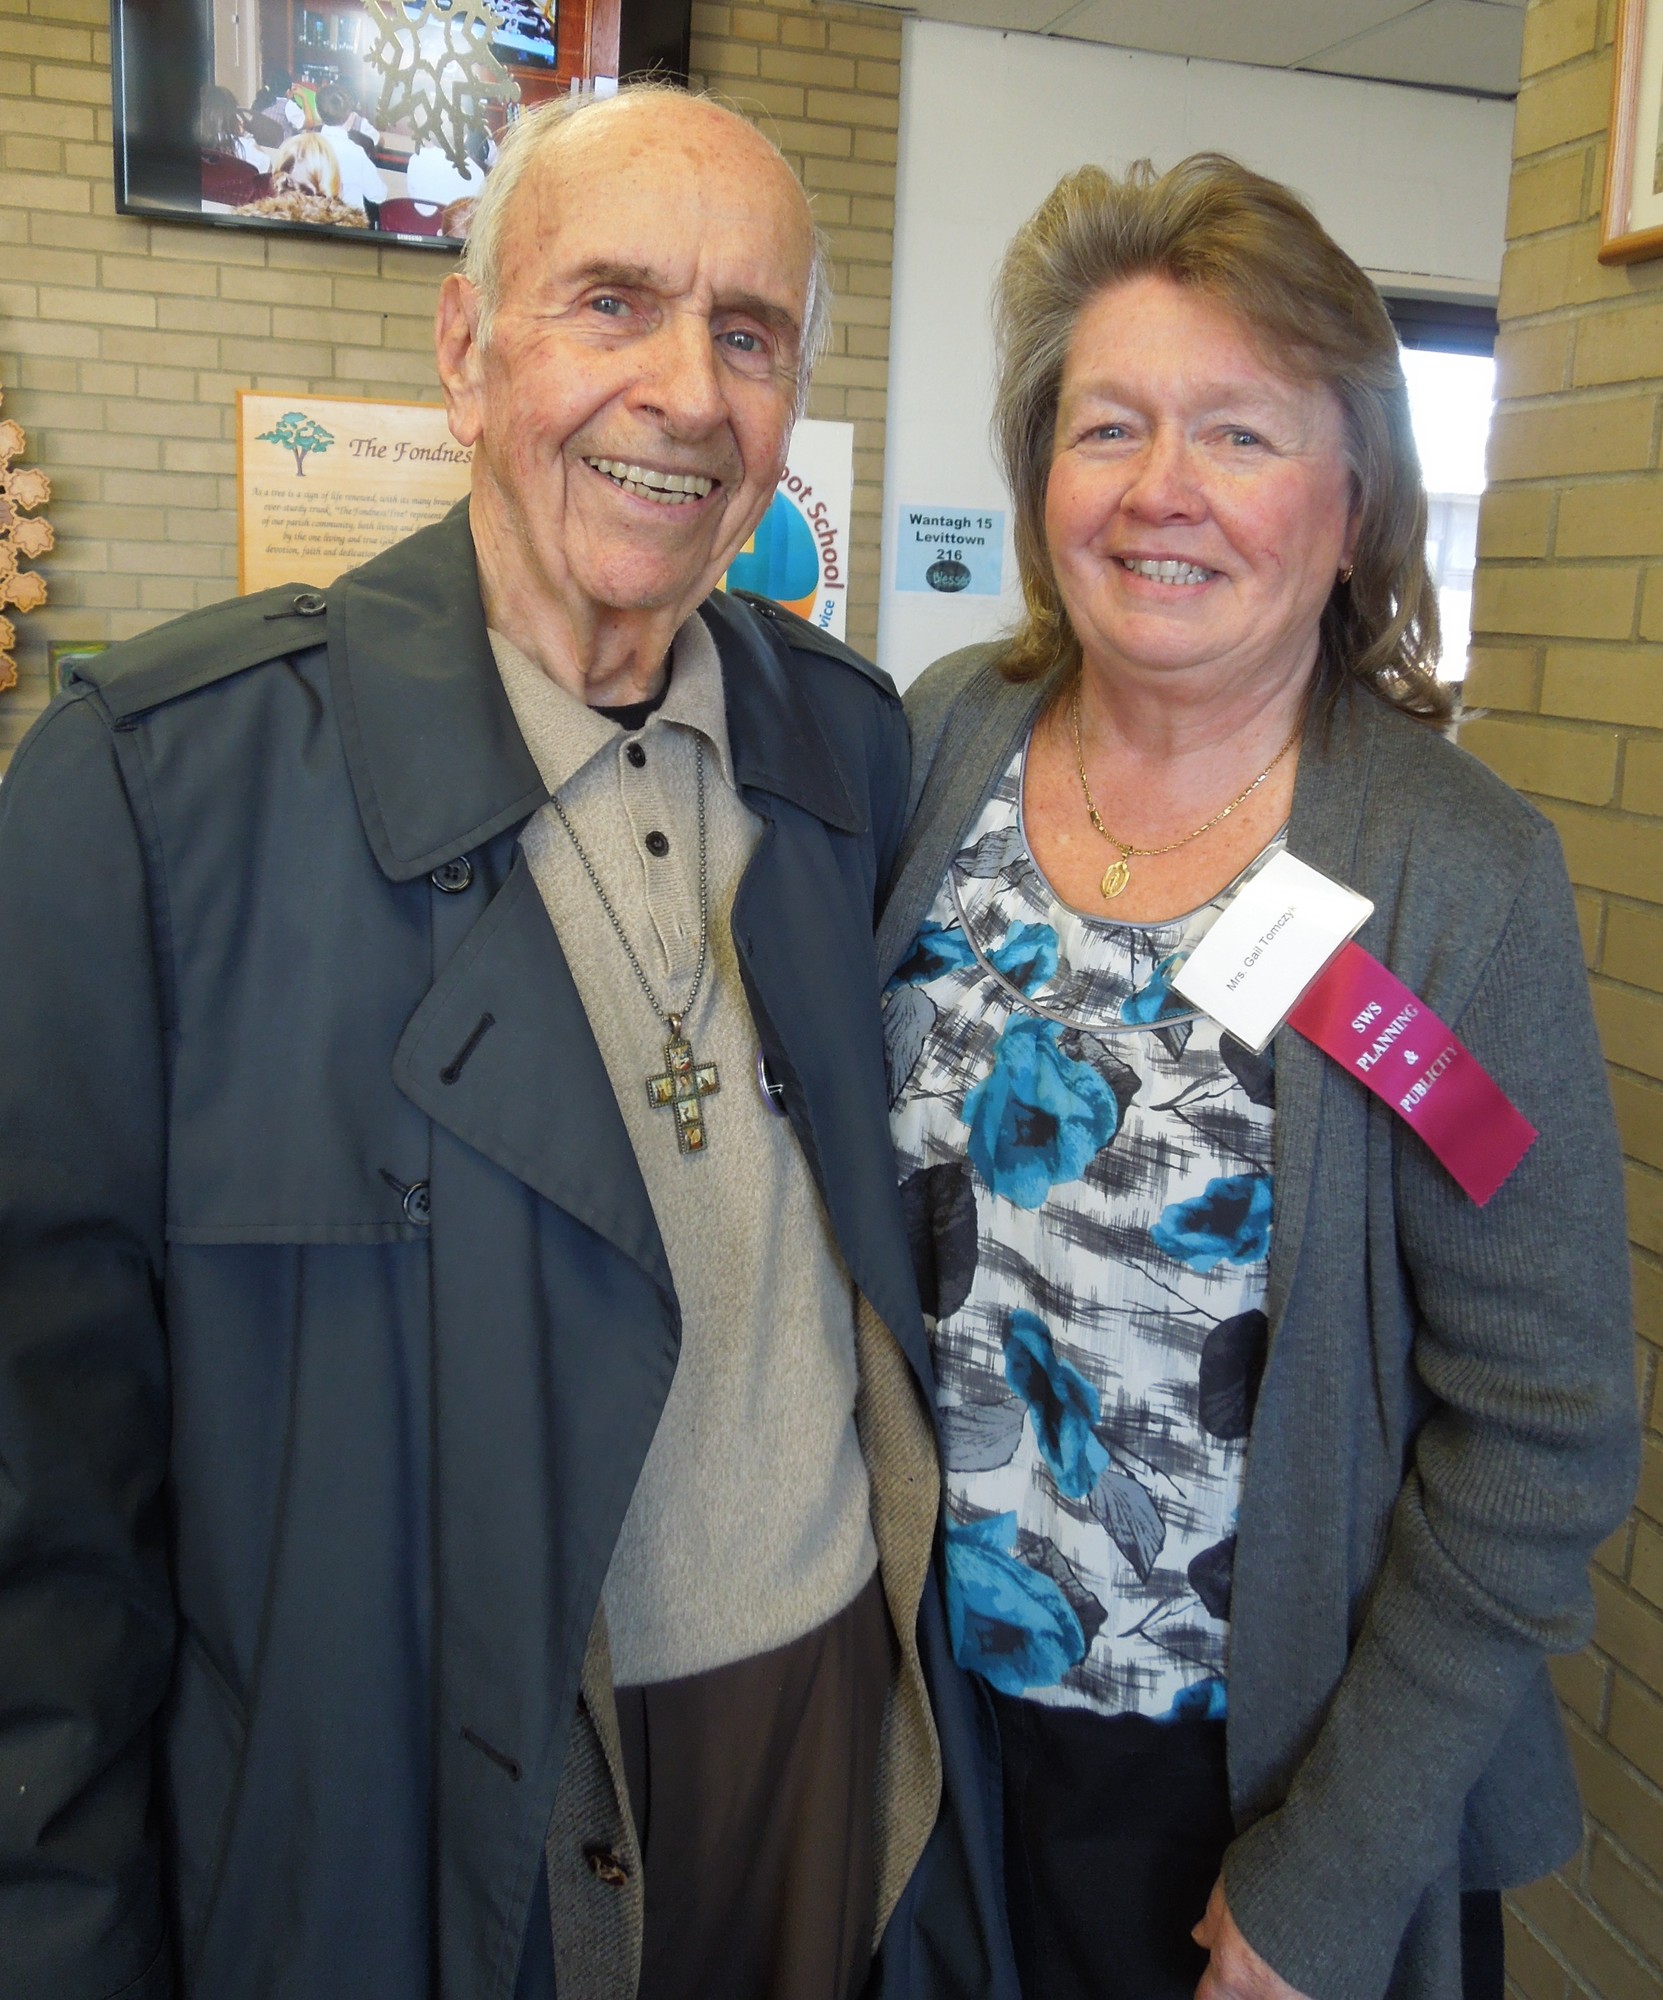 Wilbur Erb, whose four children attended the school, and Gail Tomczyk, who attended herself, came for the open house.